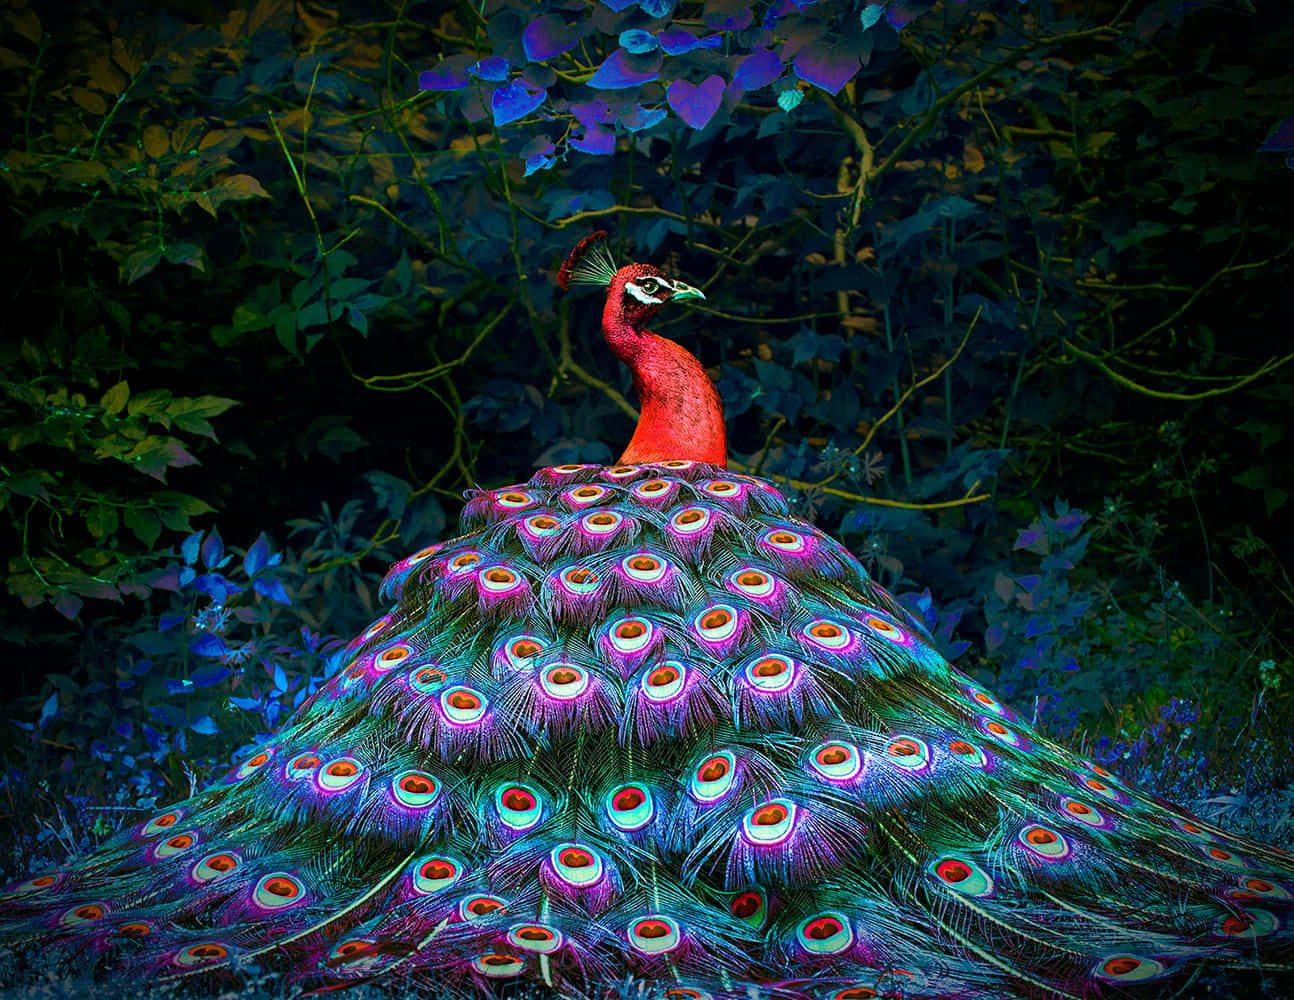 A beautiful peacock displays its colorful feathers.